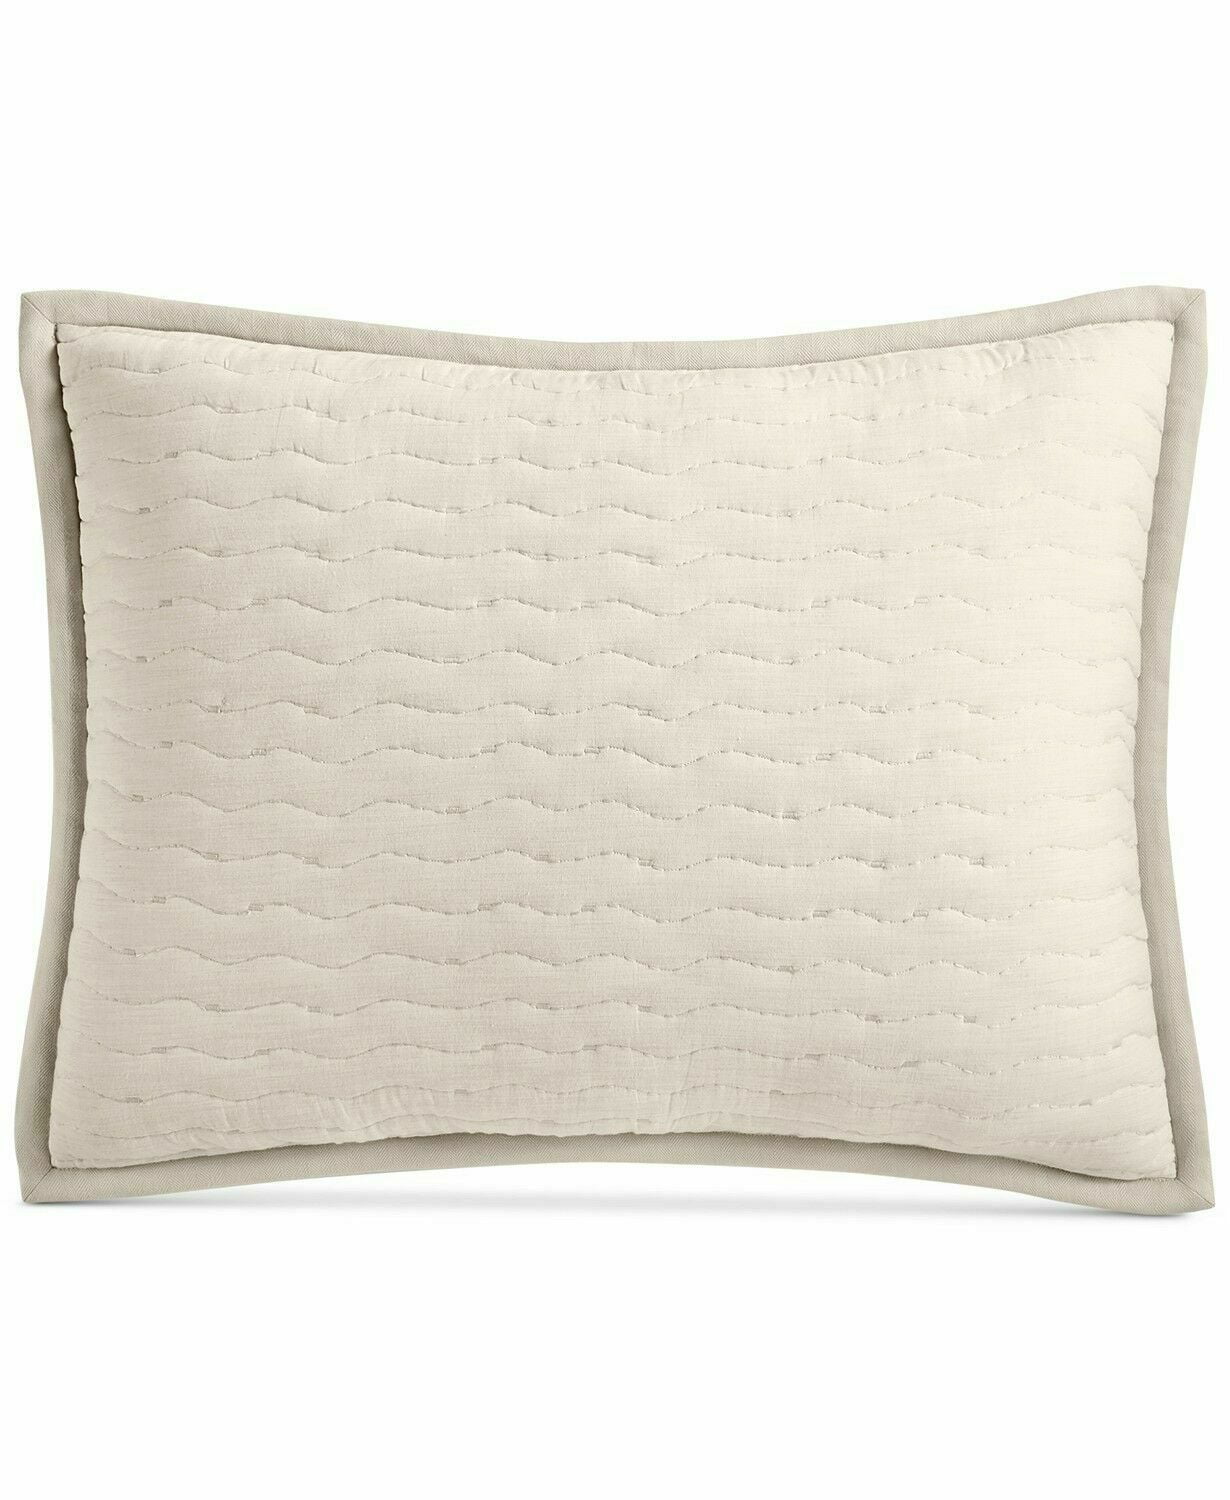 Details about   Hotel Collection Distressed Chevron Quilted King Sham 